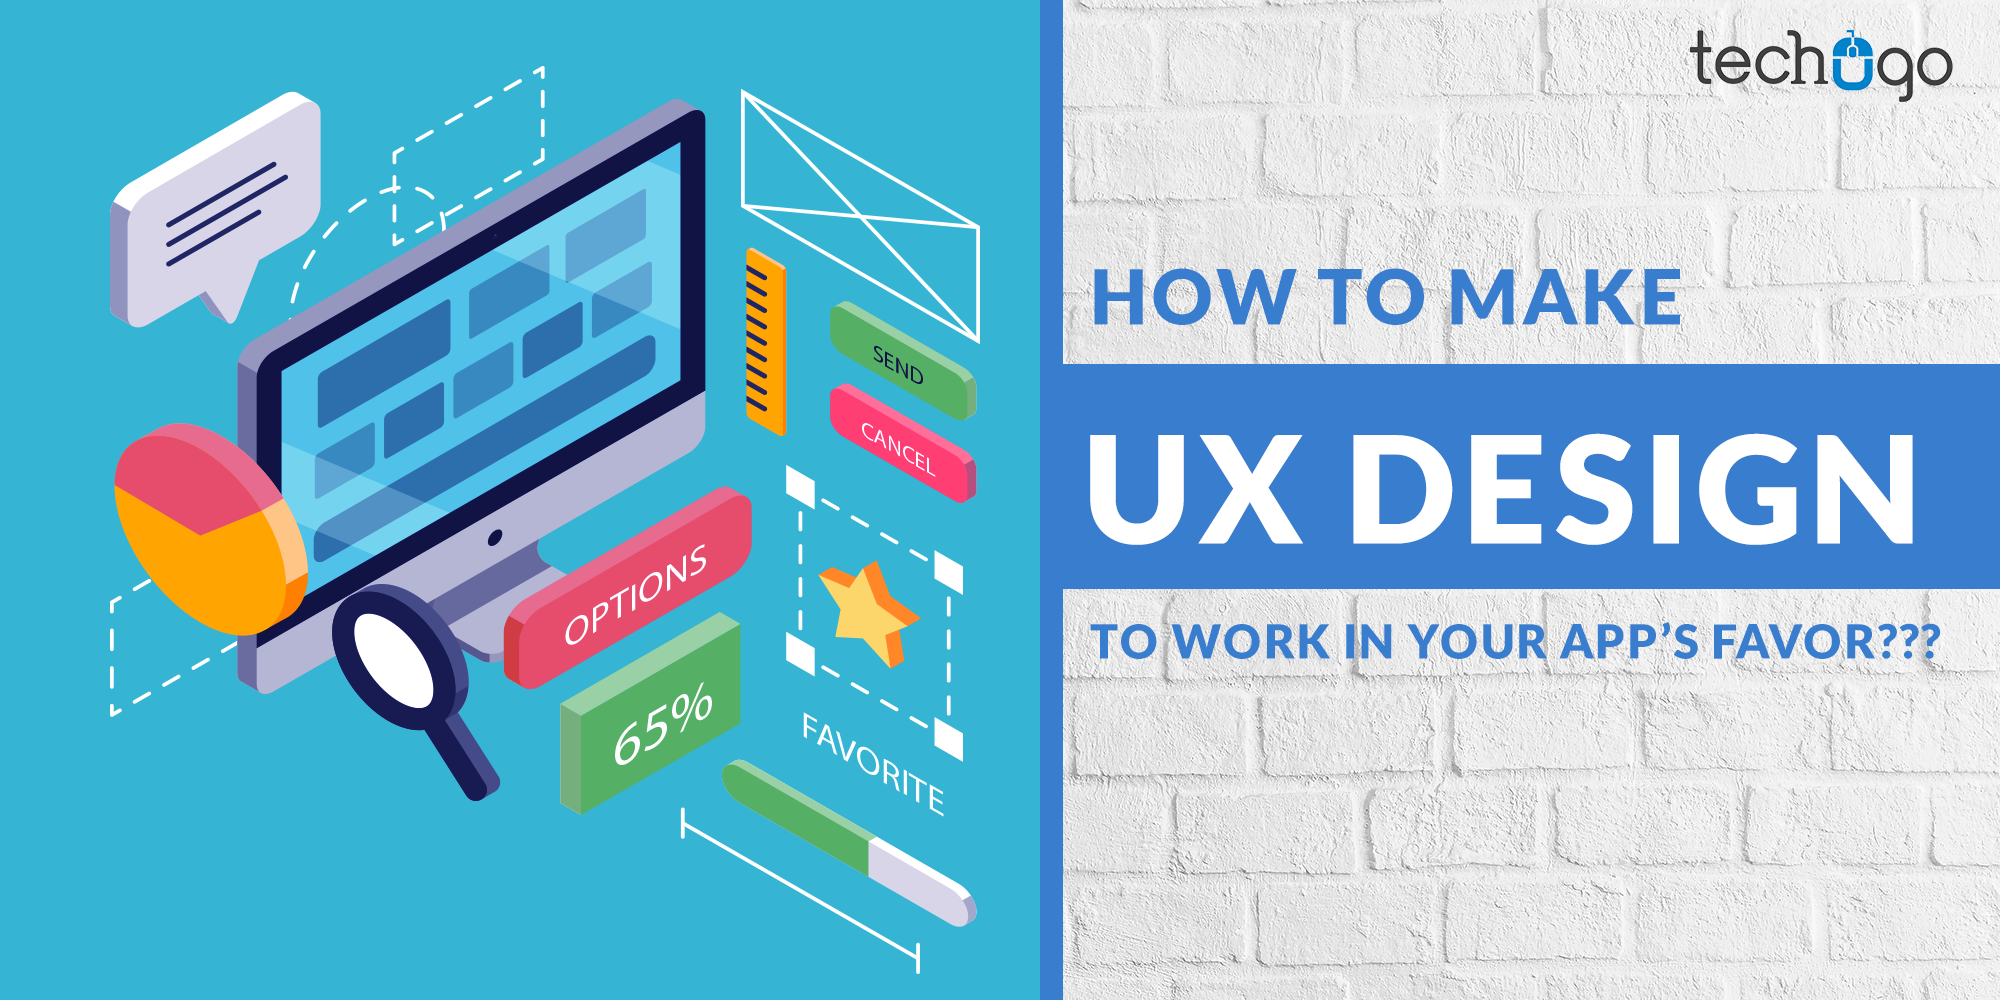 How To Make UX Design To Work In Your App’s Favor